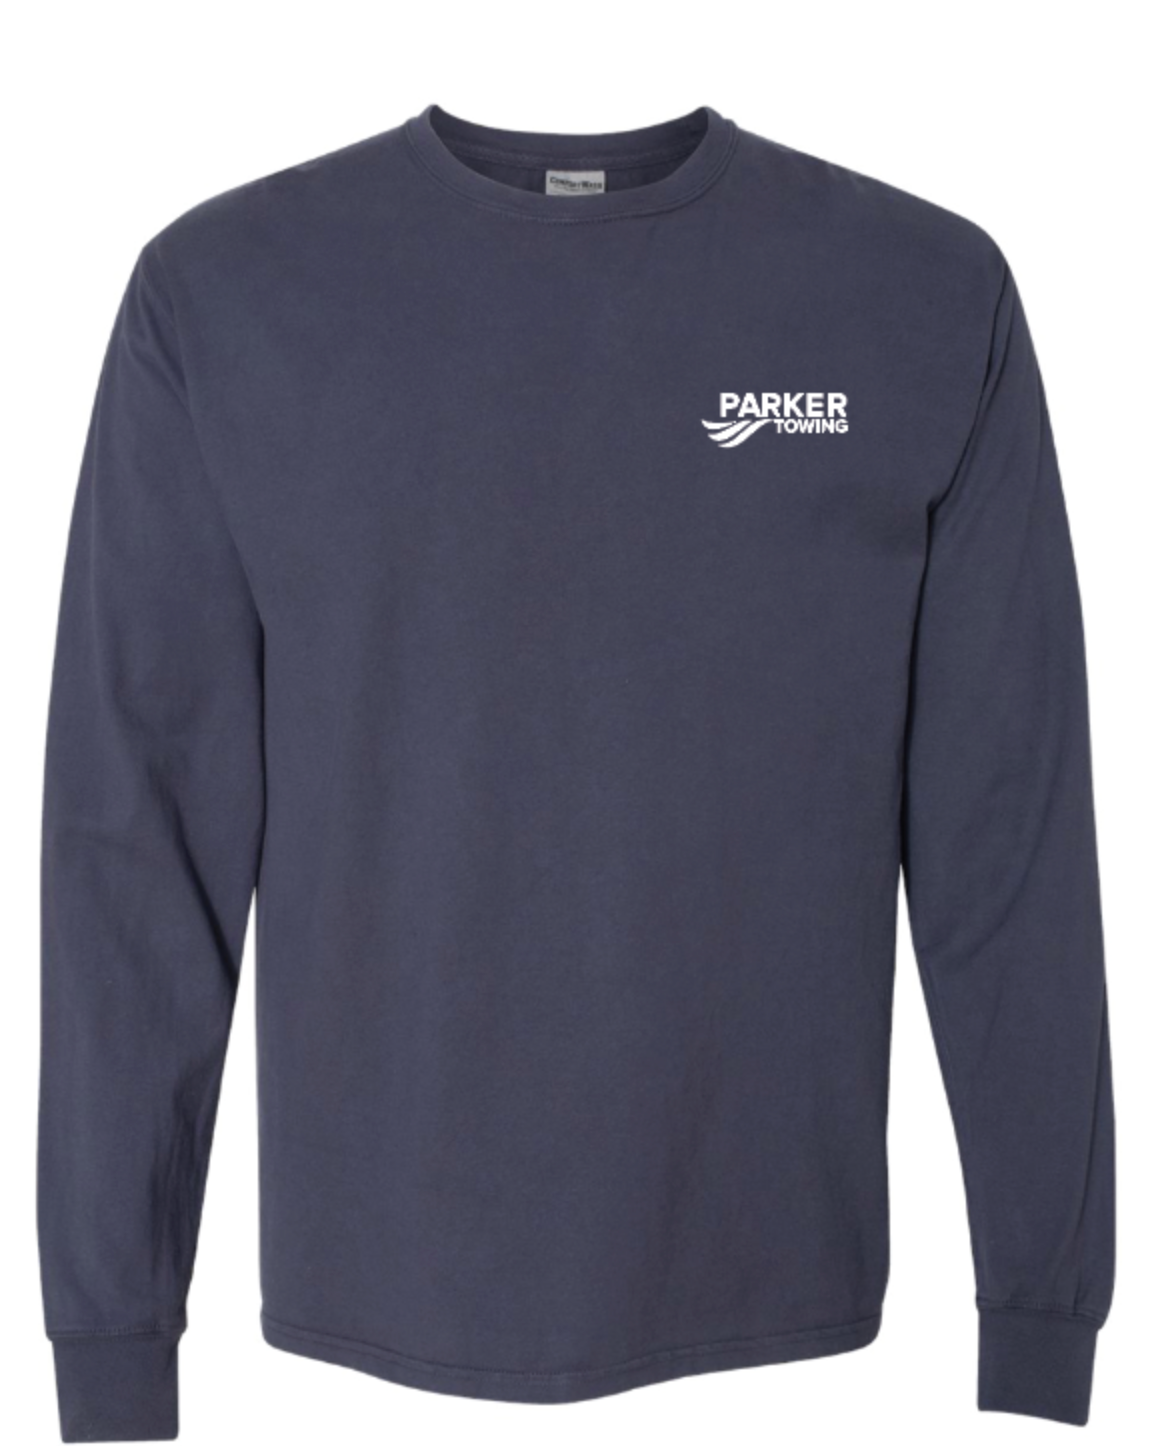 PARKER TOWING COTTON LONG SLEEVE TEE